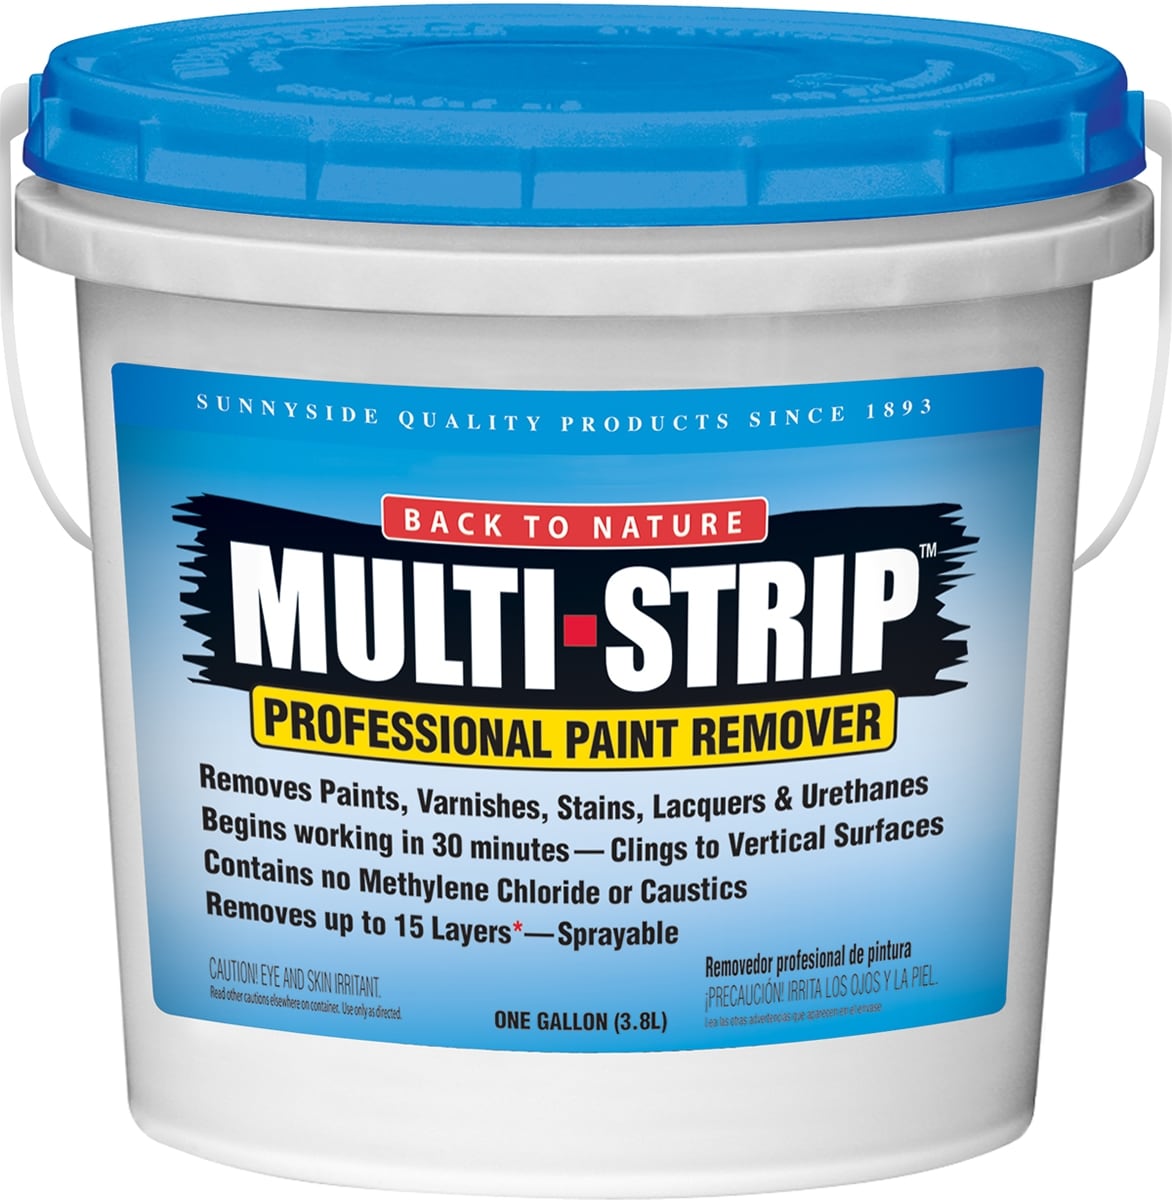 Buy Paint Remover For Plastic online